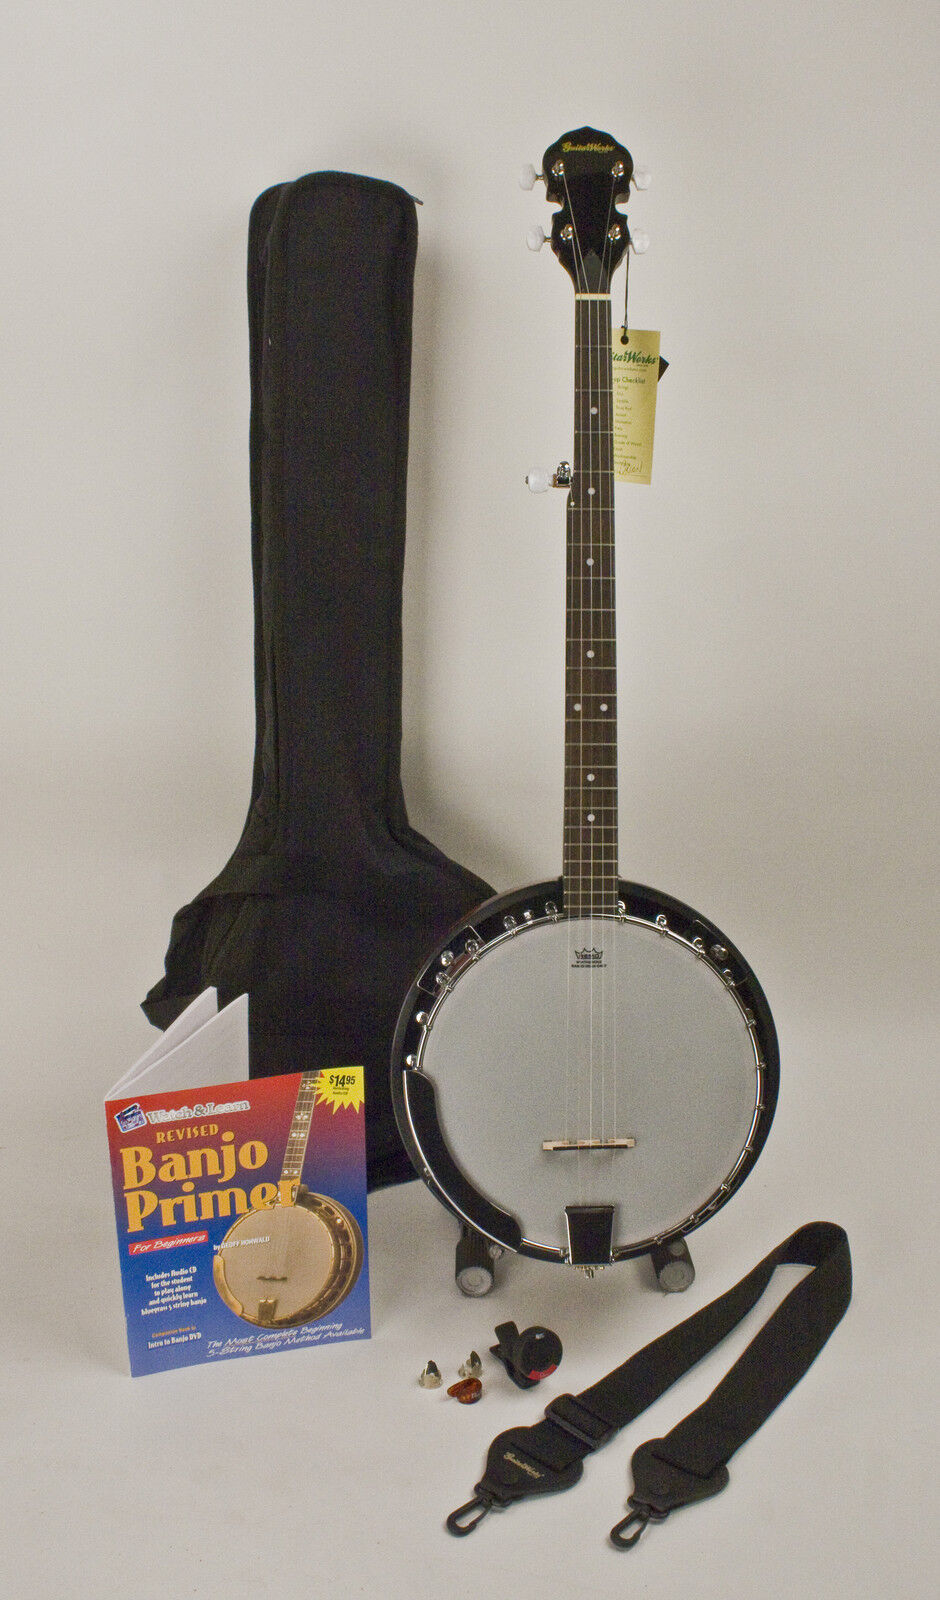 5-STRING BANJO SET-UP & ADJUSTED FOR EASY PLAY WITH EVERYTHING YOU NEED PACKAGE